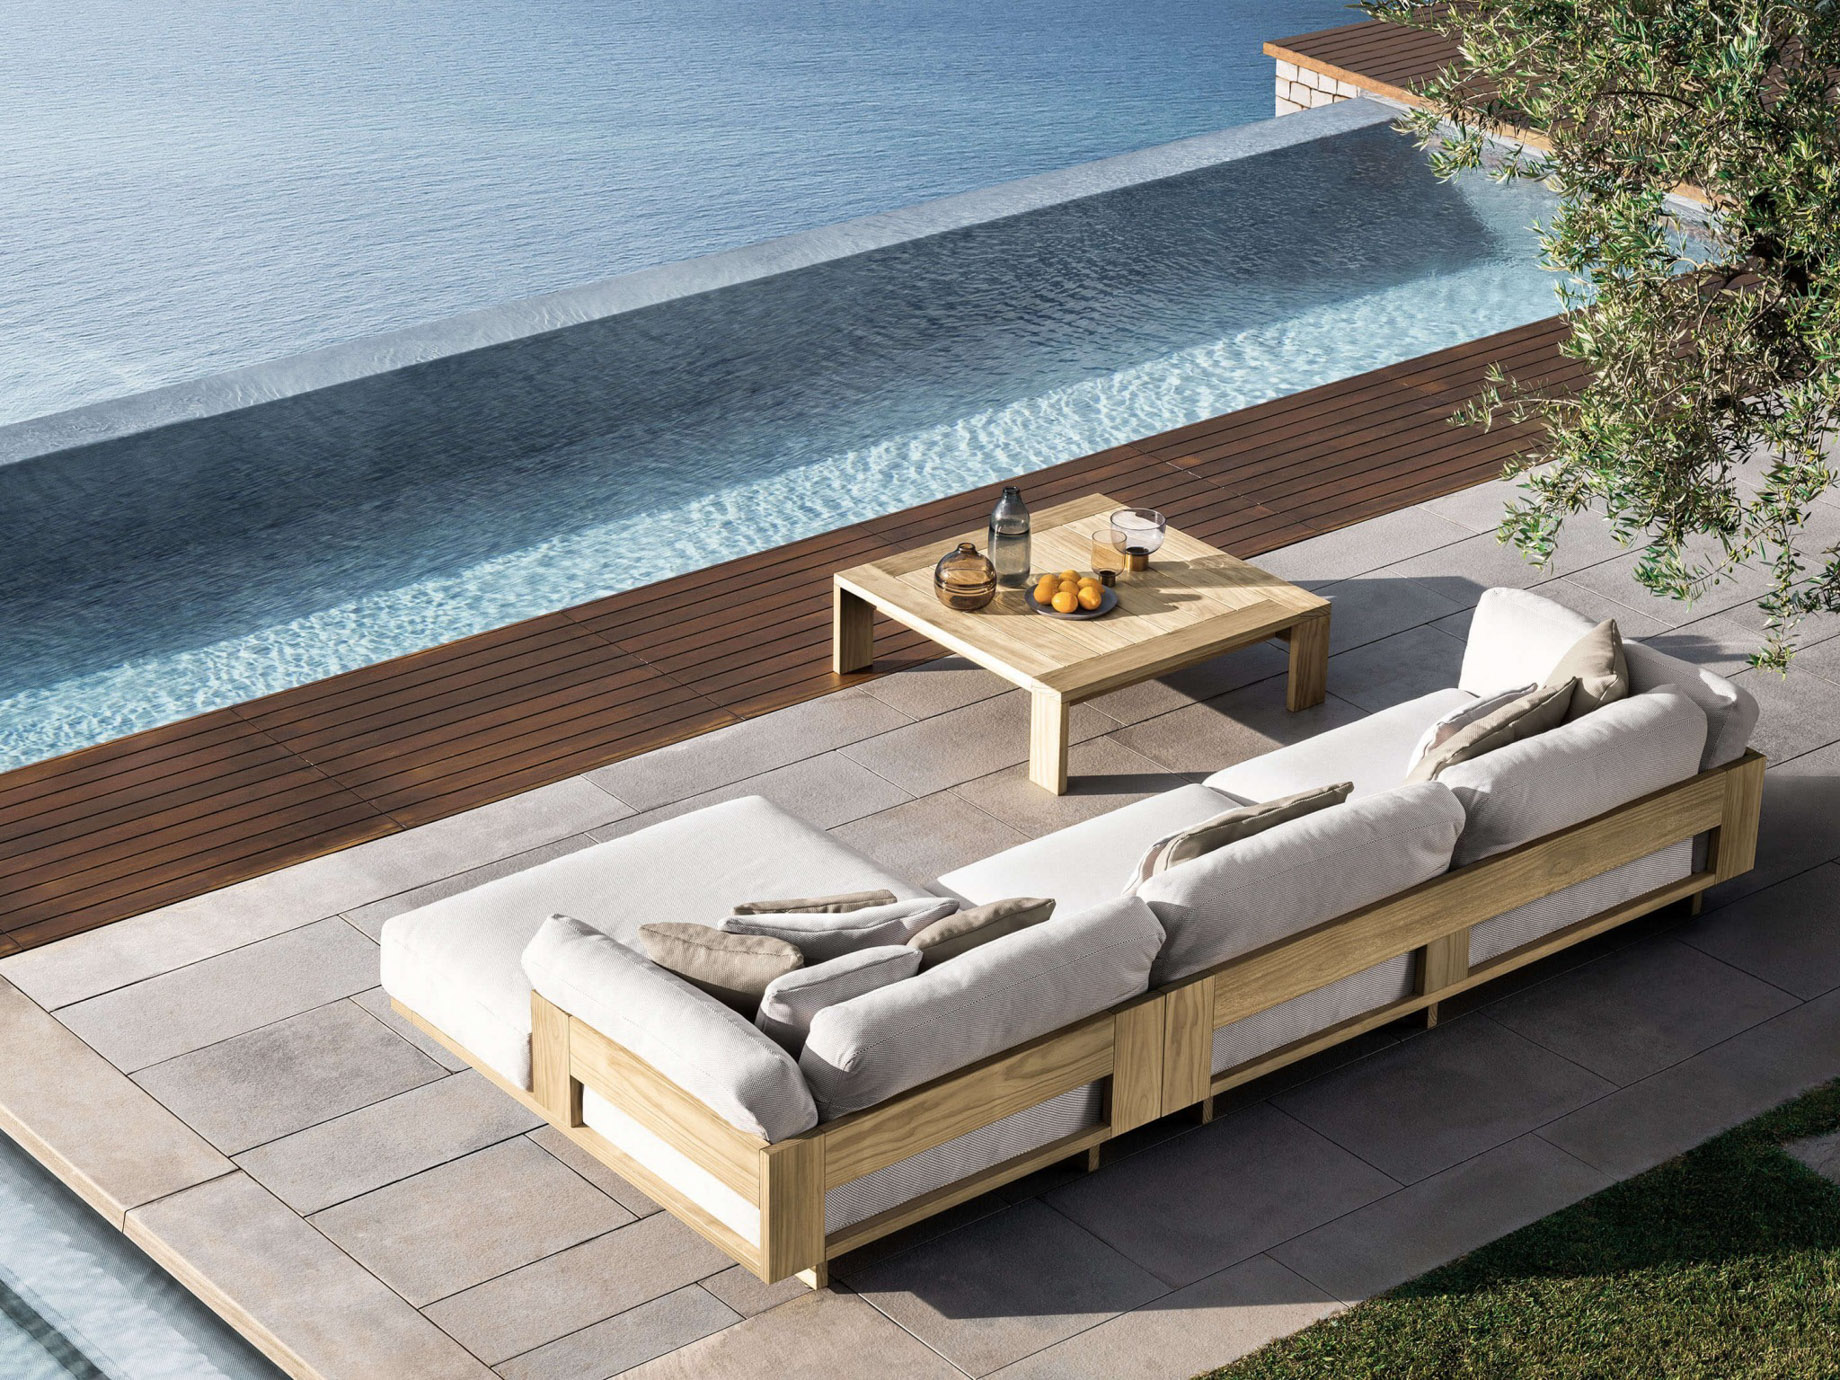 Argo Outdoor Furniture Collection by Talenti Outdoor Living Italy – Palomba Serafini Associati